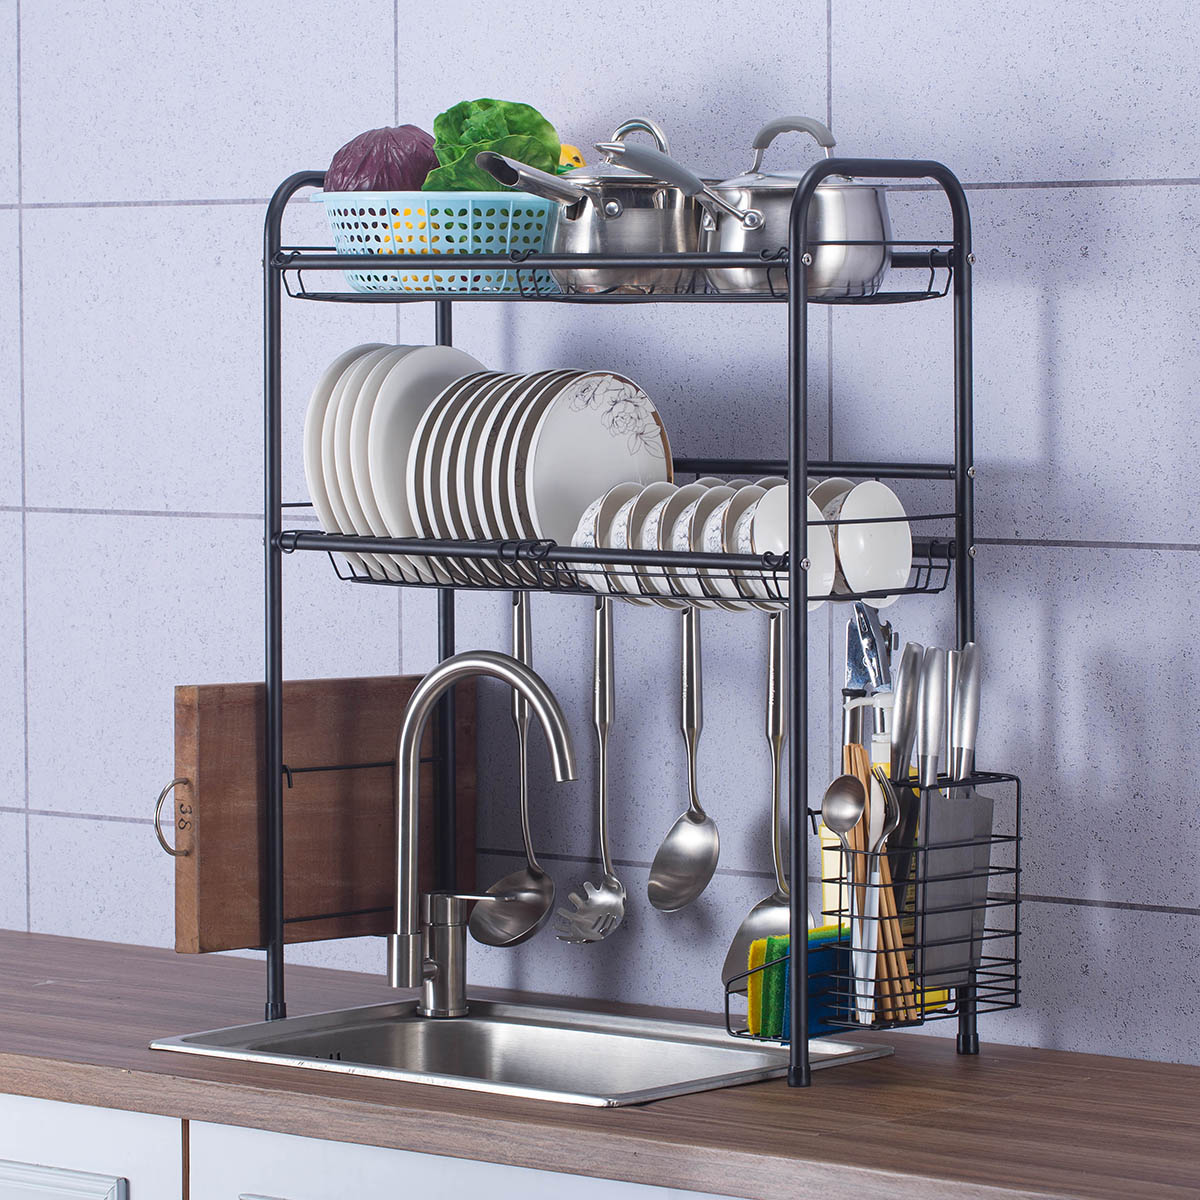 Double-Layer-Shelf-Dish-Stainless-Holder-Steel-Sink-Drain-Rack-Kitchen-Cutlery-Drying-Drainer-Kitche-1566519-2